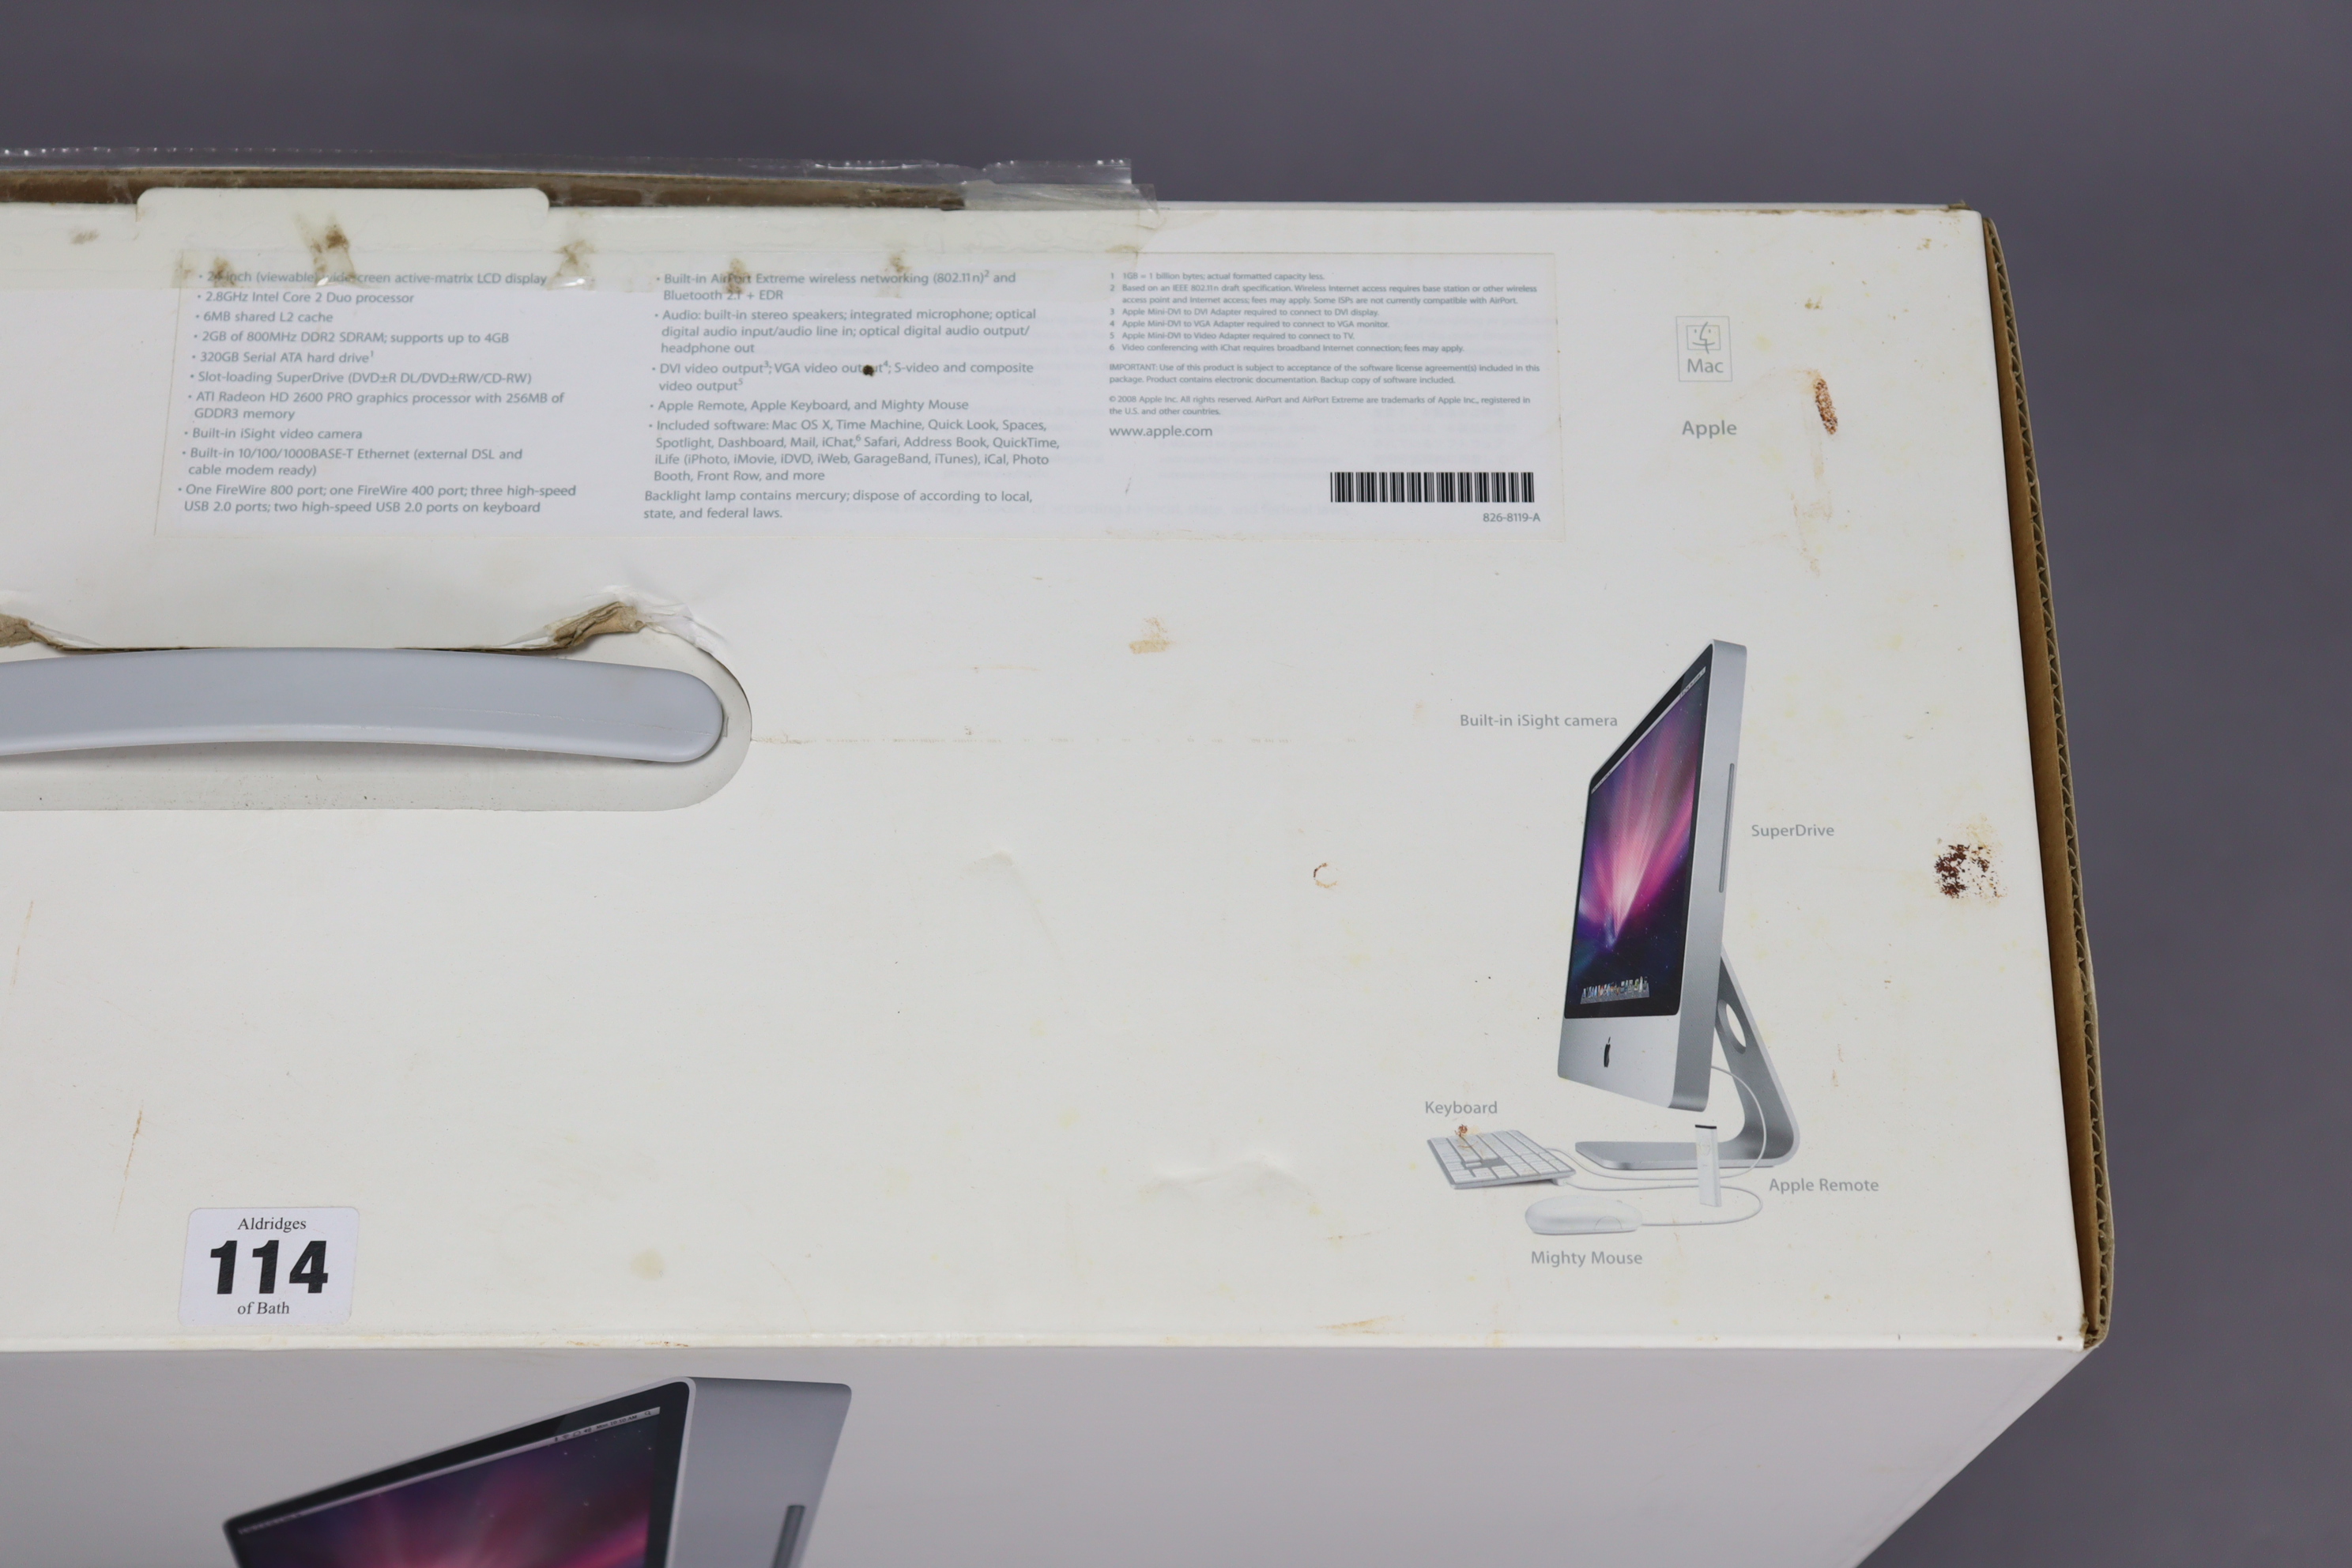 An Apple “Imac” computer, boxed. - Image 5 of 7